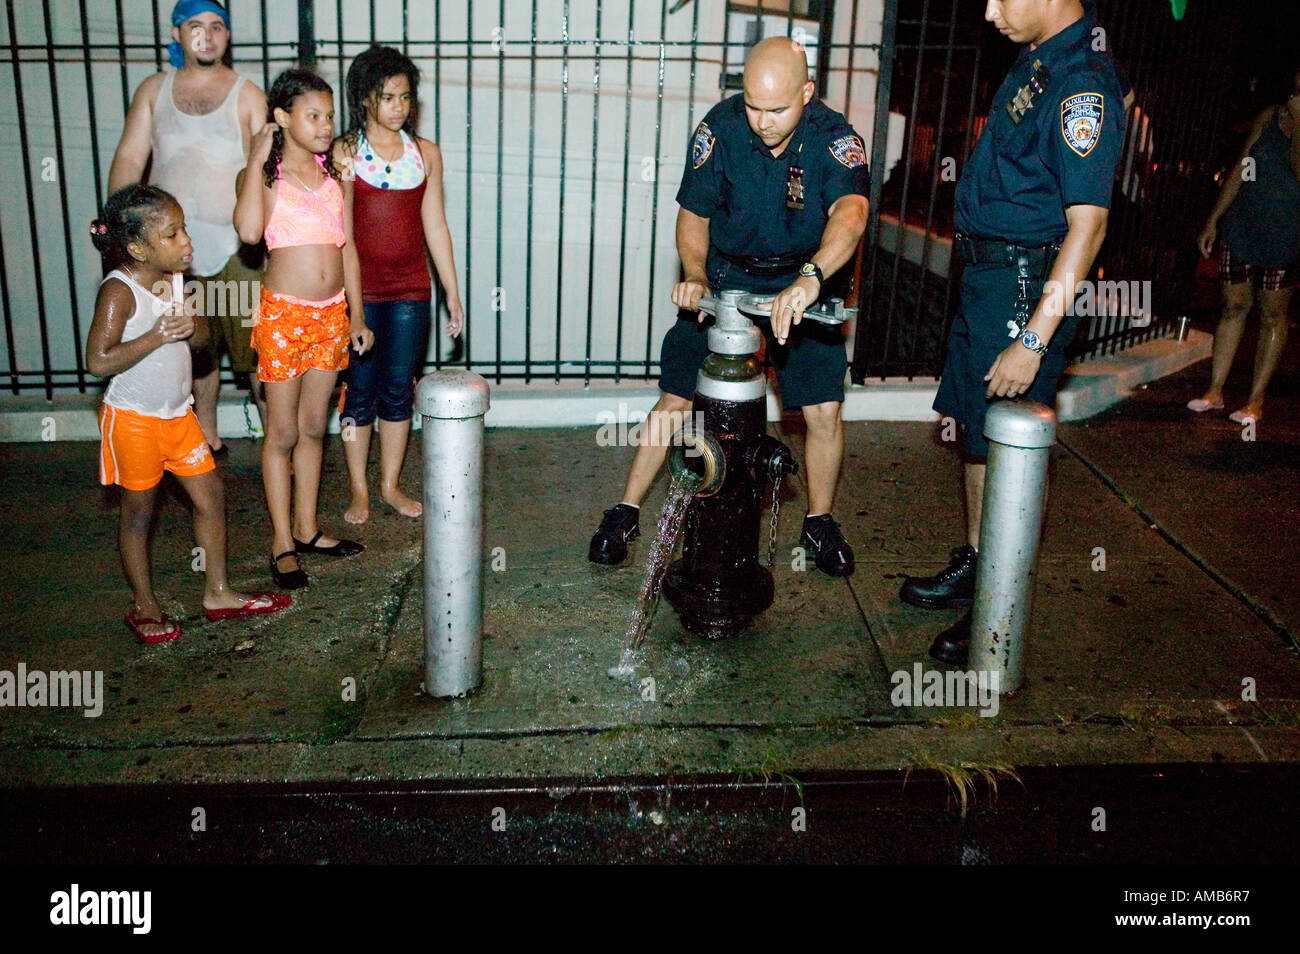 Police officers turn off an illegally opened fire hydrant in Harlem New York City USA August 2005 Stock Photo